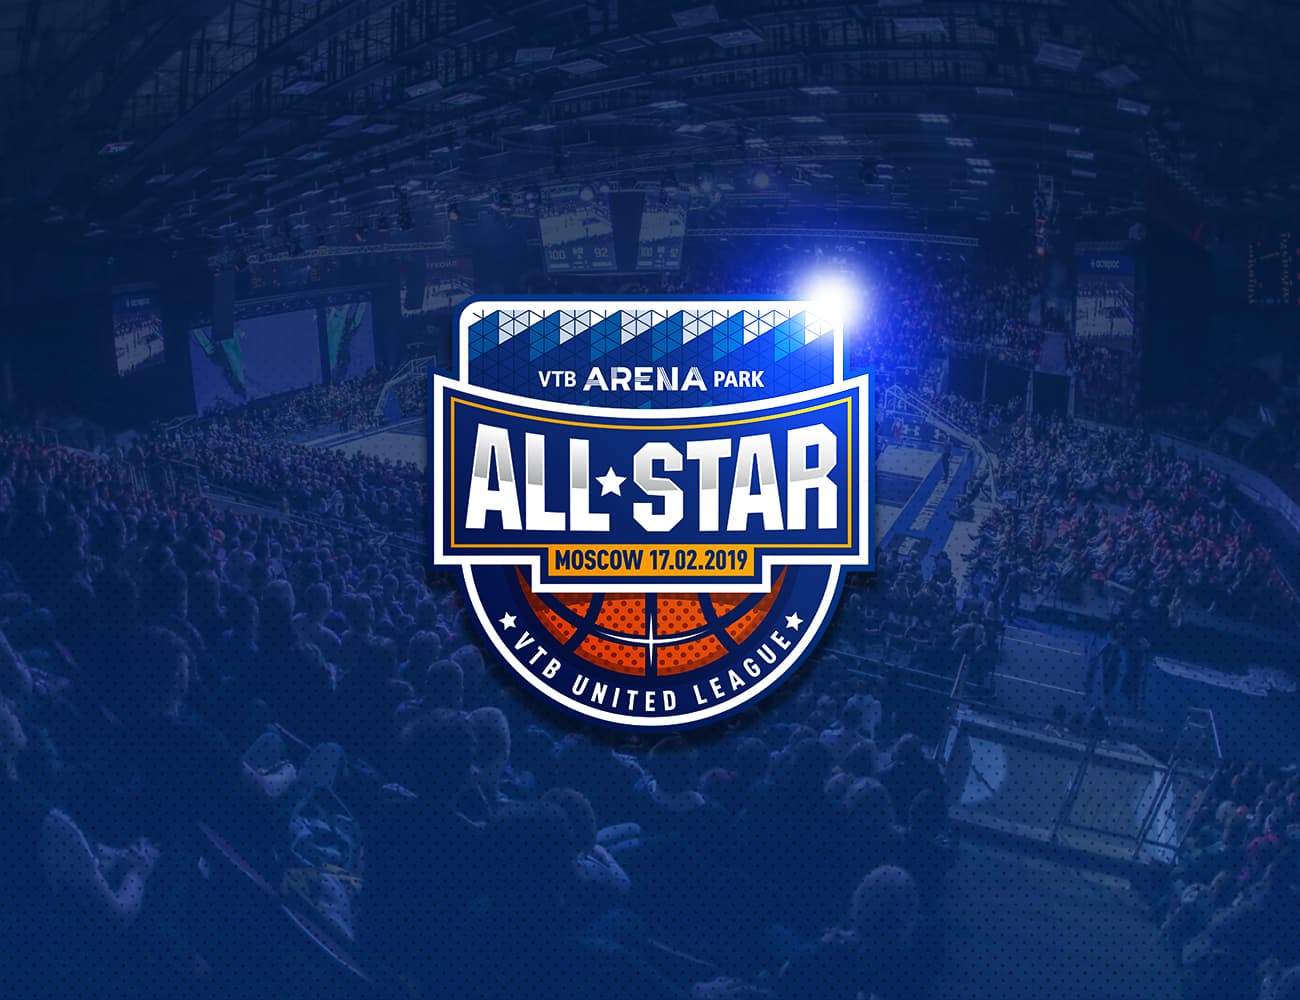 How To Apply For All-Star Game Credentials